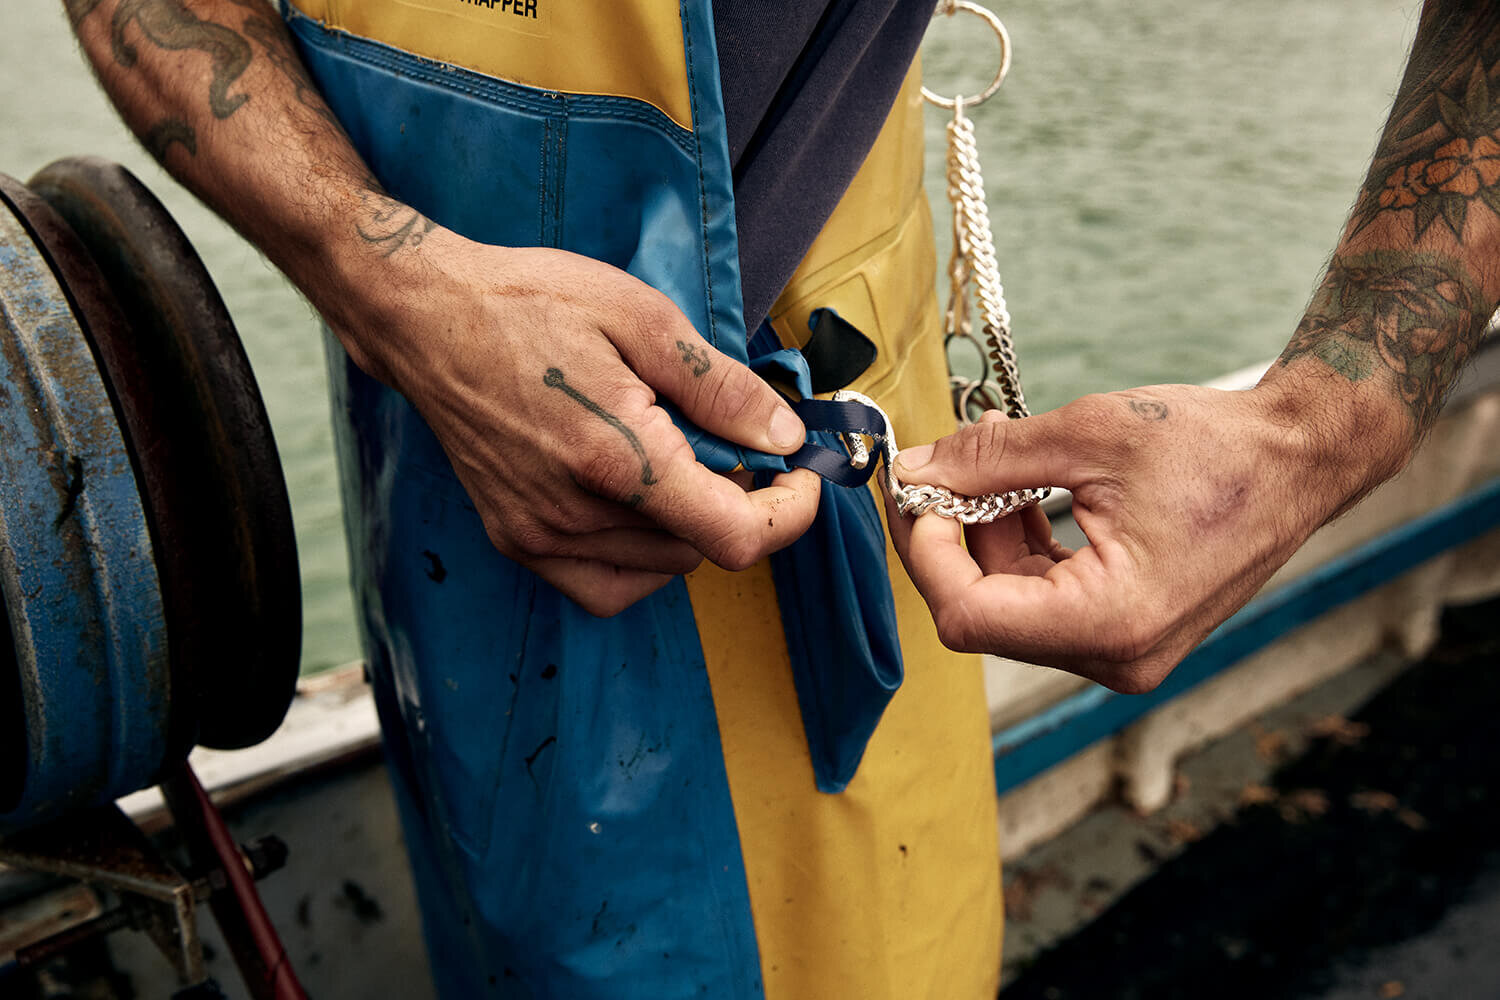 Fisherman fastening clasp on keyring. Stood on boat wearing blue and yellow waders.